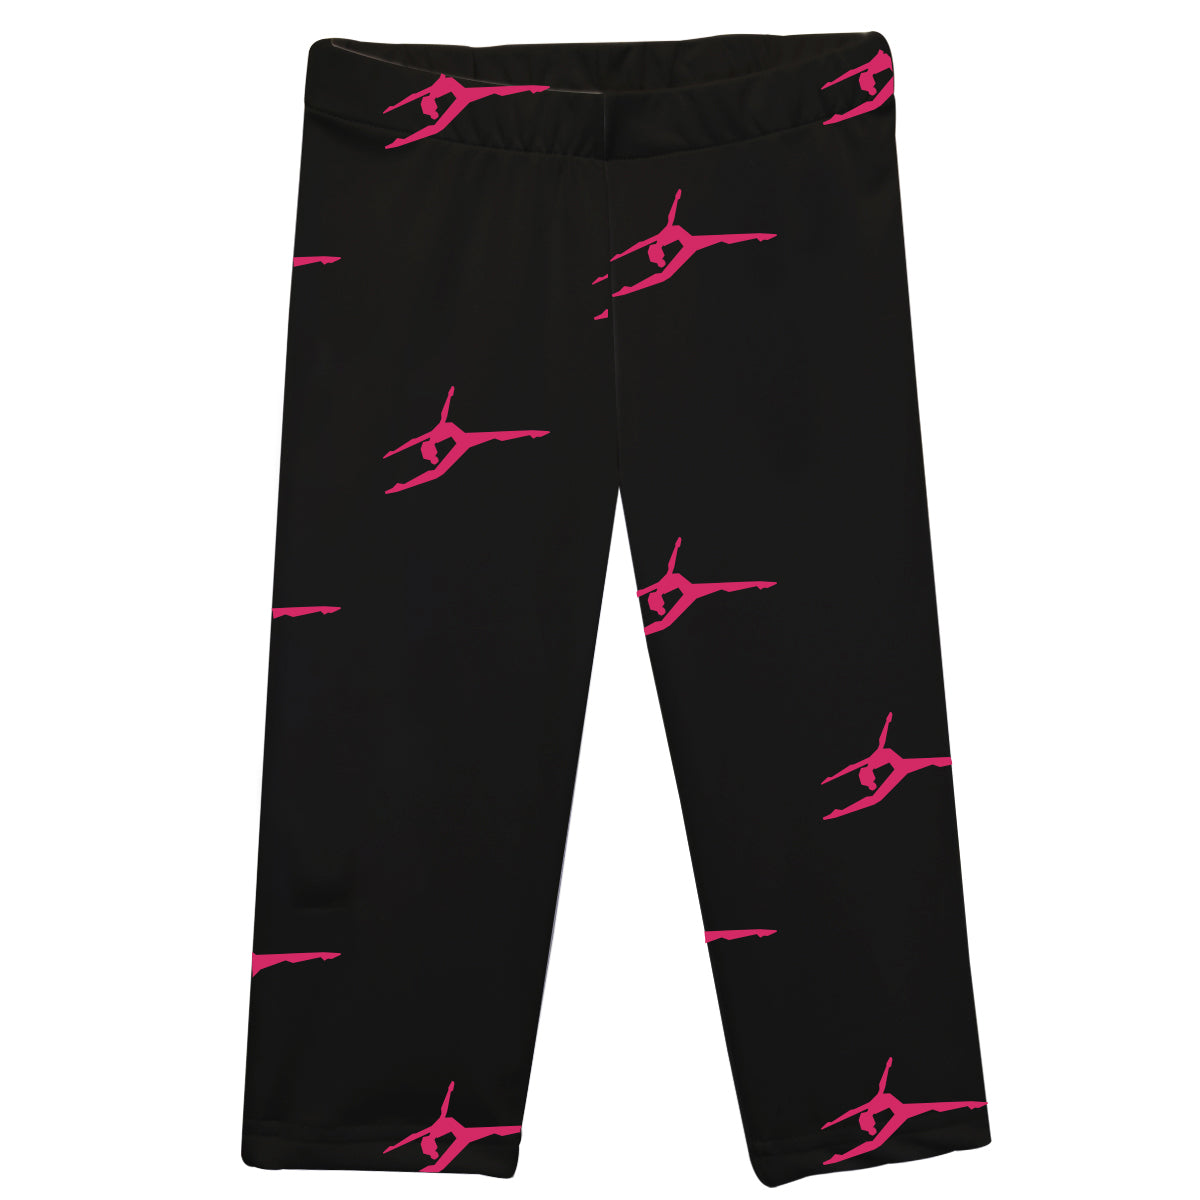 Black and pink girls dance leggings - Wimziy&Co.